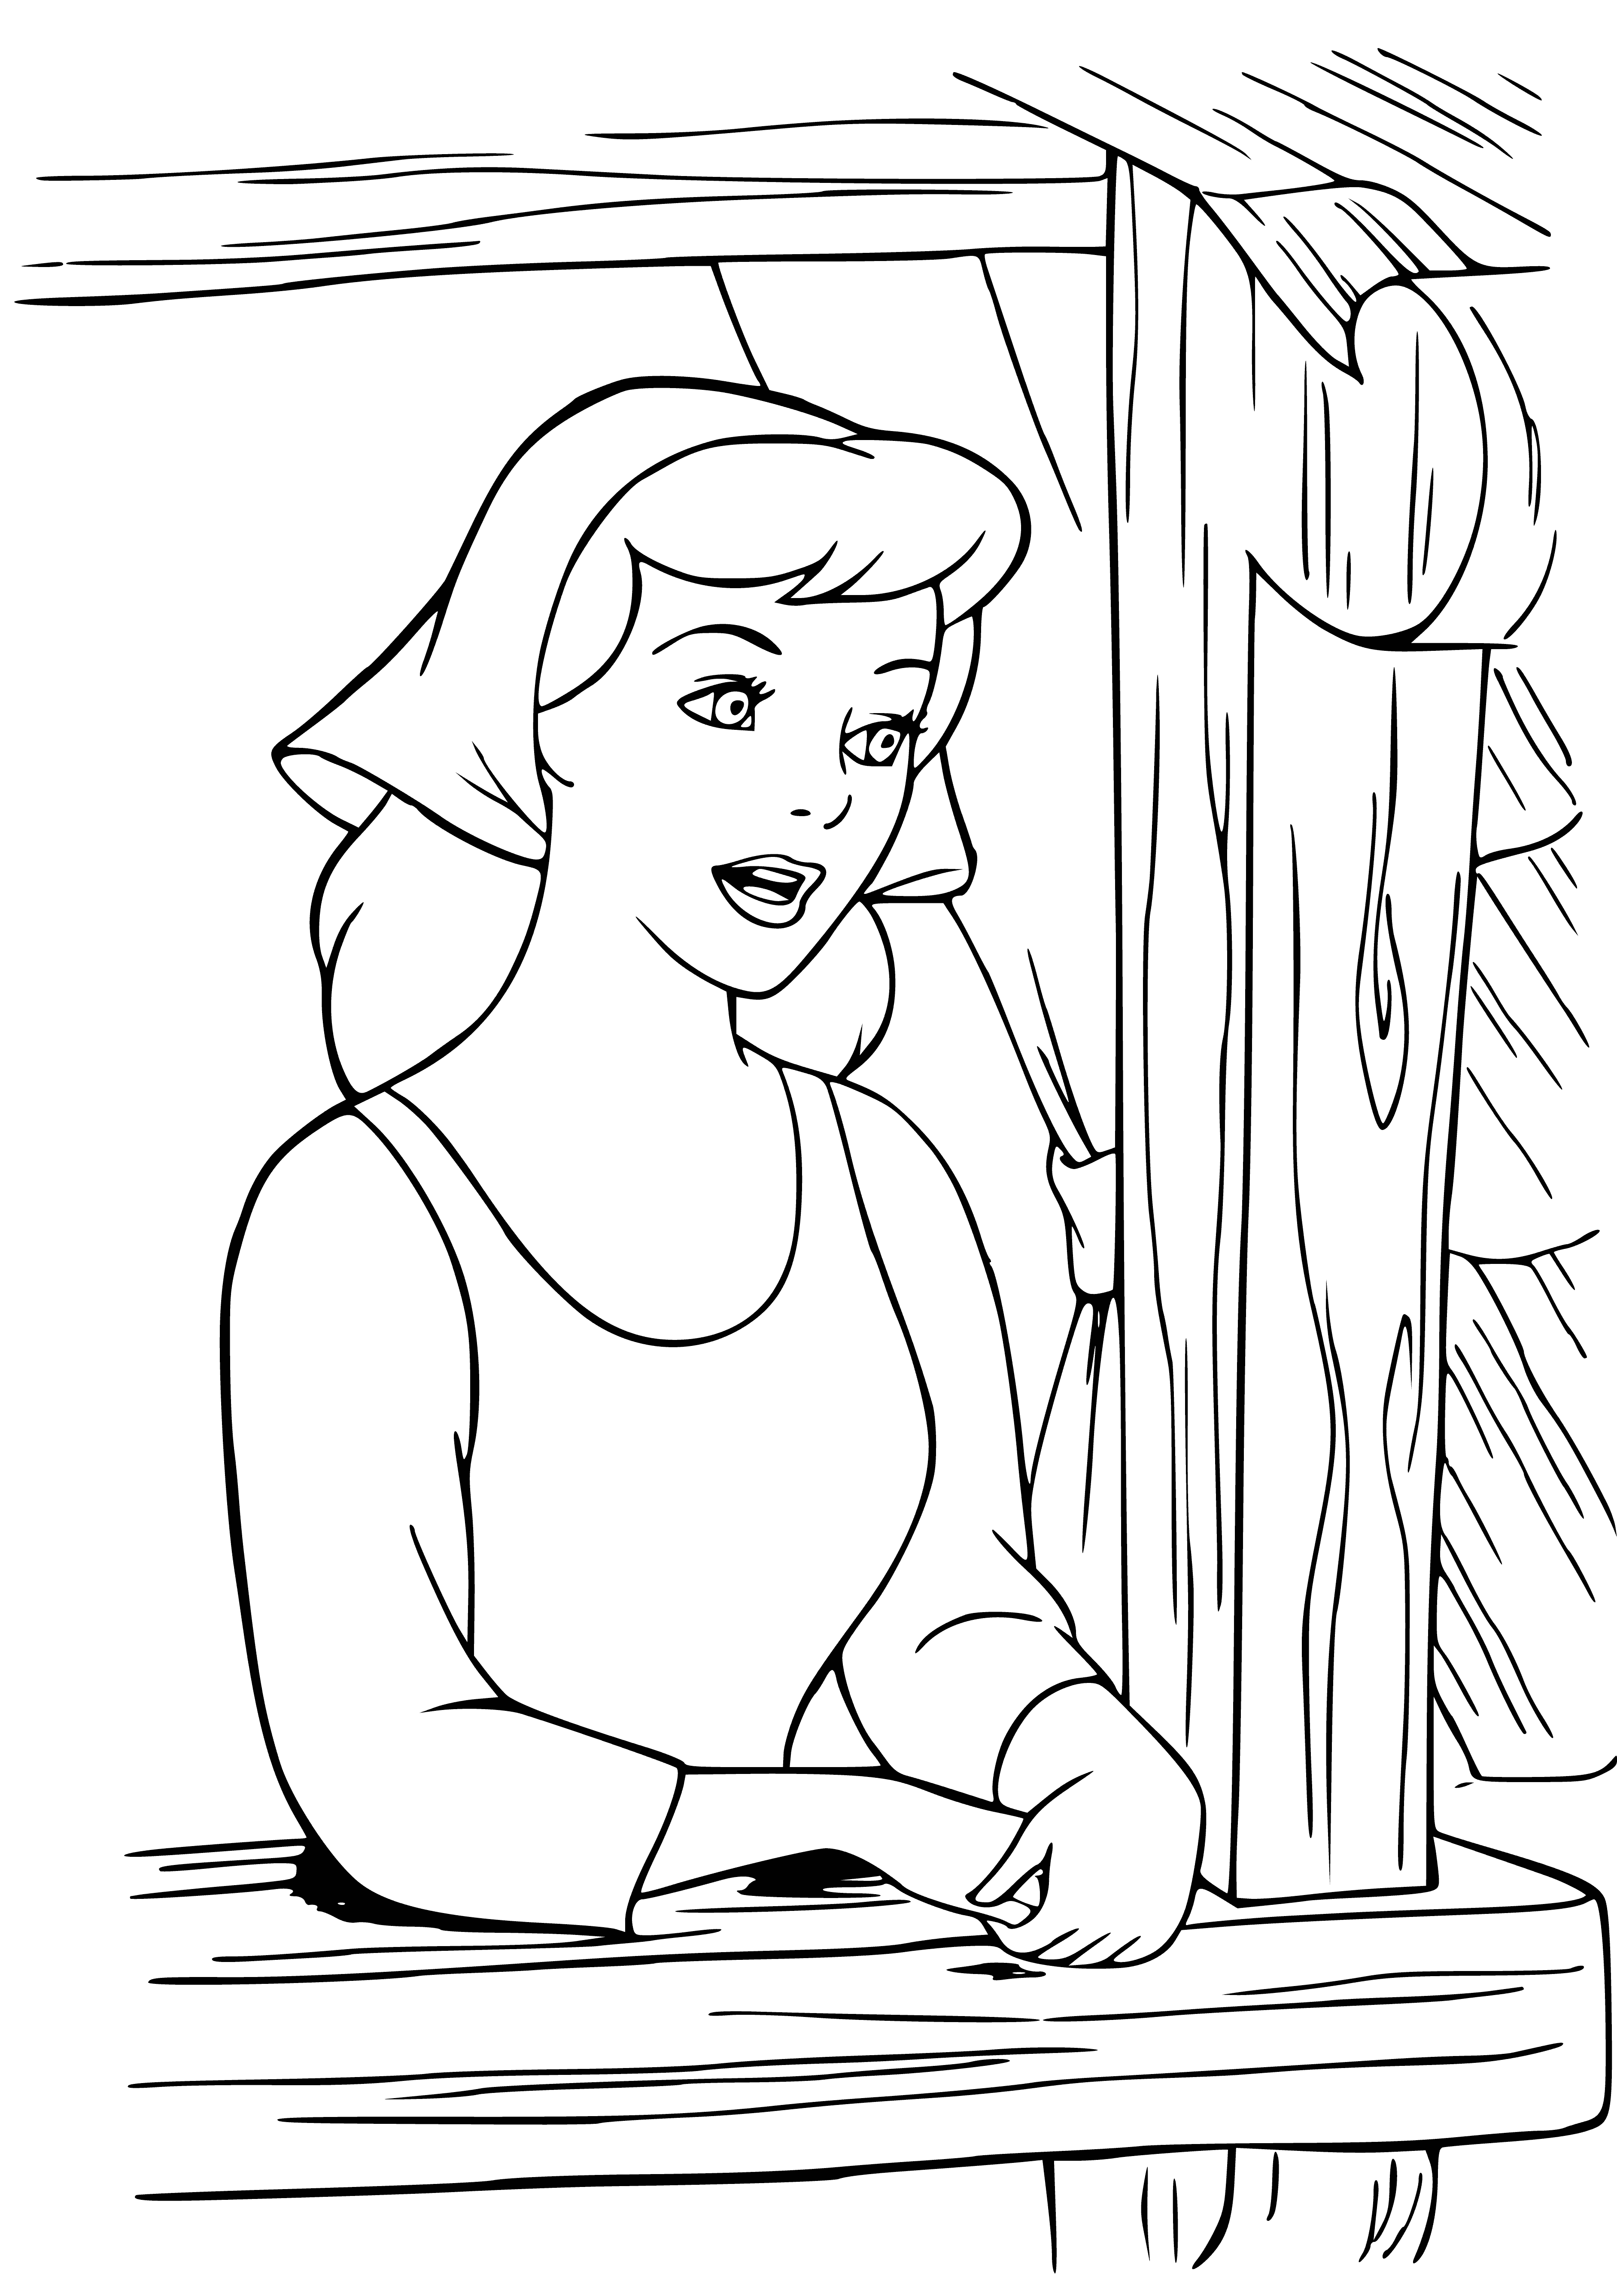 coloring page: Cinderella sings with bluebird on shoulder, holding golden one in hand in forest.